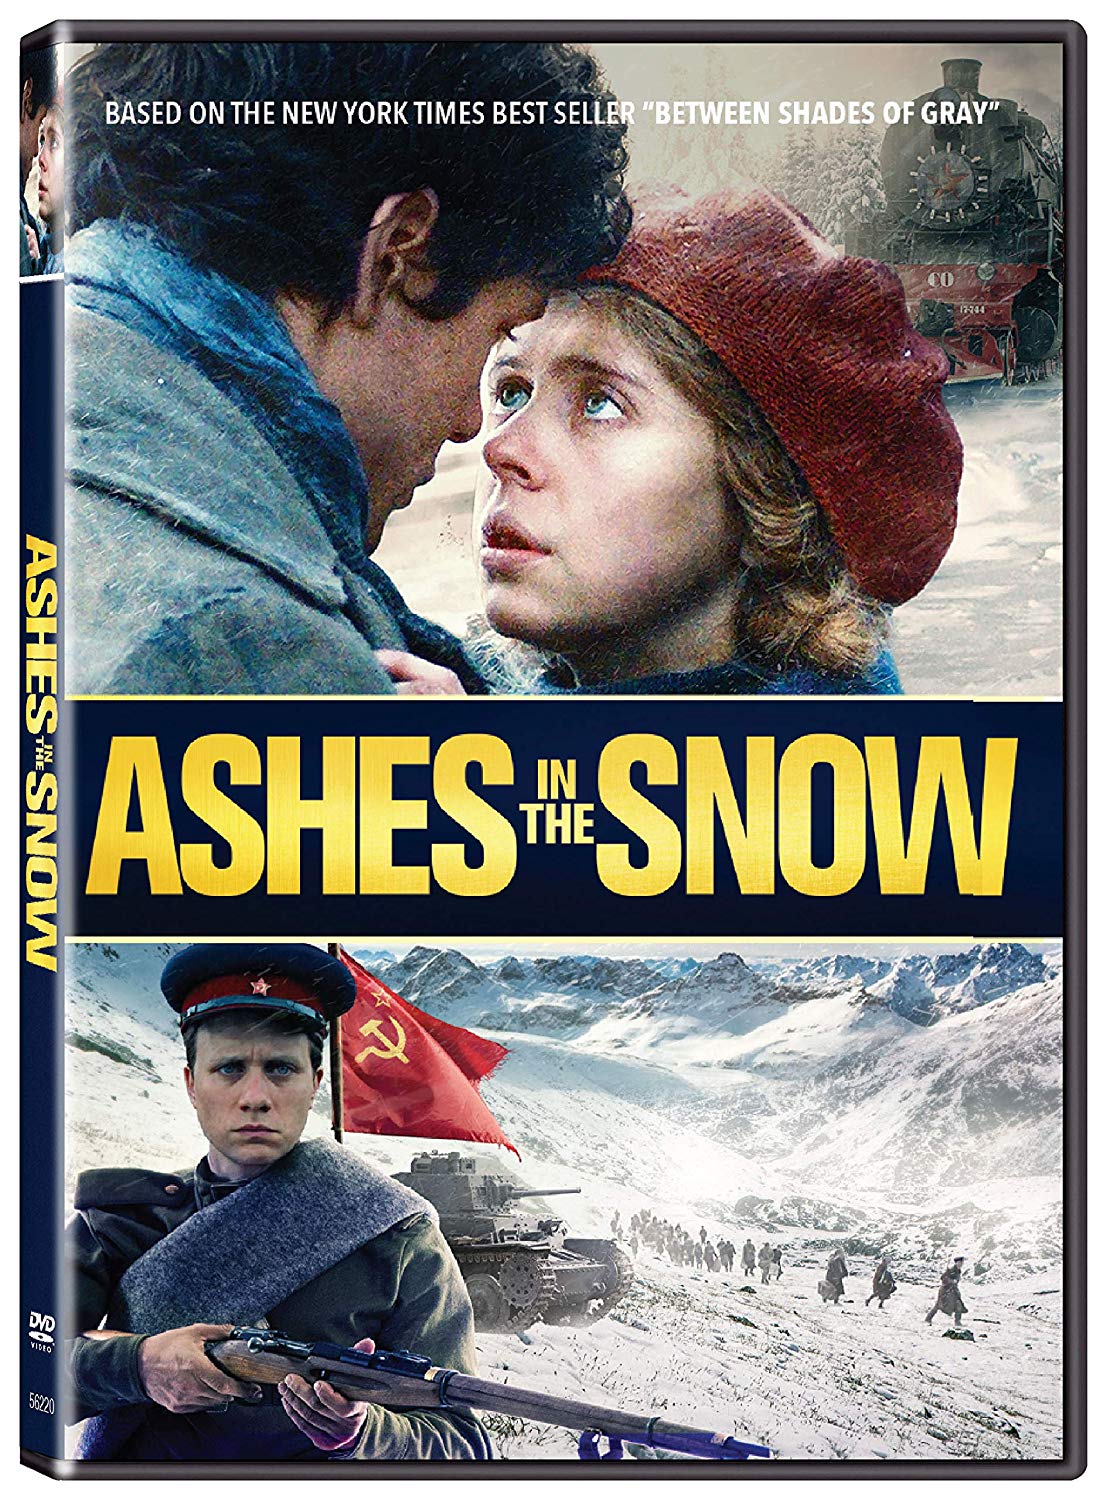 Ashes in the snow (feature)